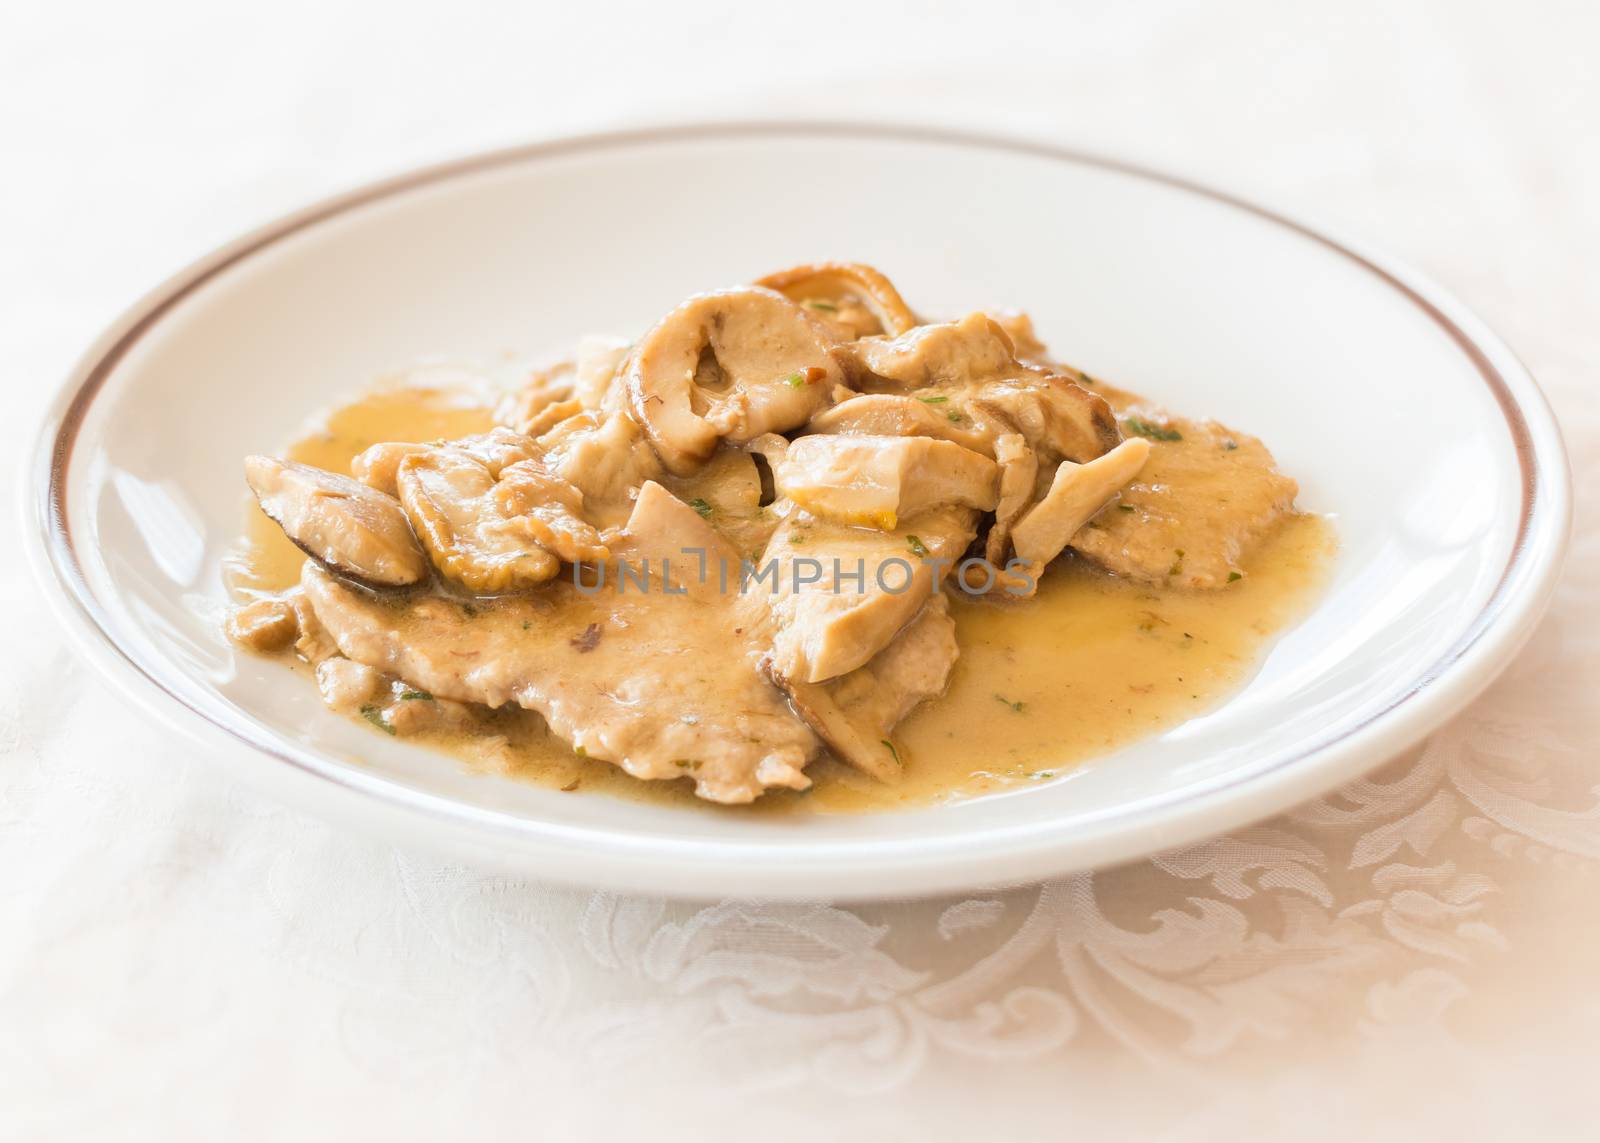 In the pictured scallops of veal with mushrooms (Porcini).